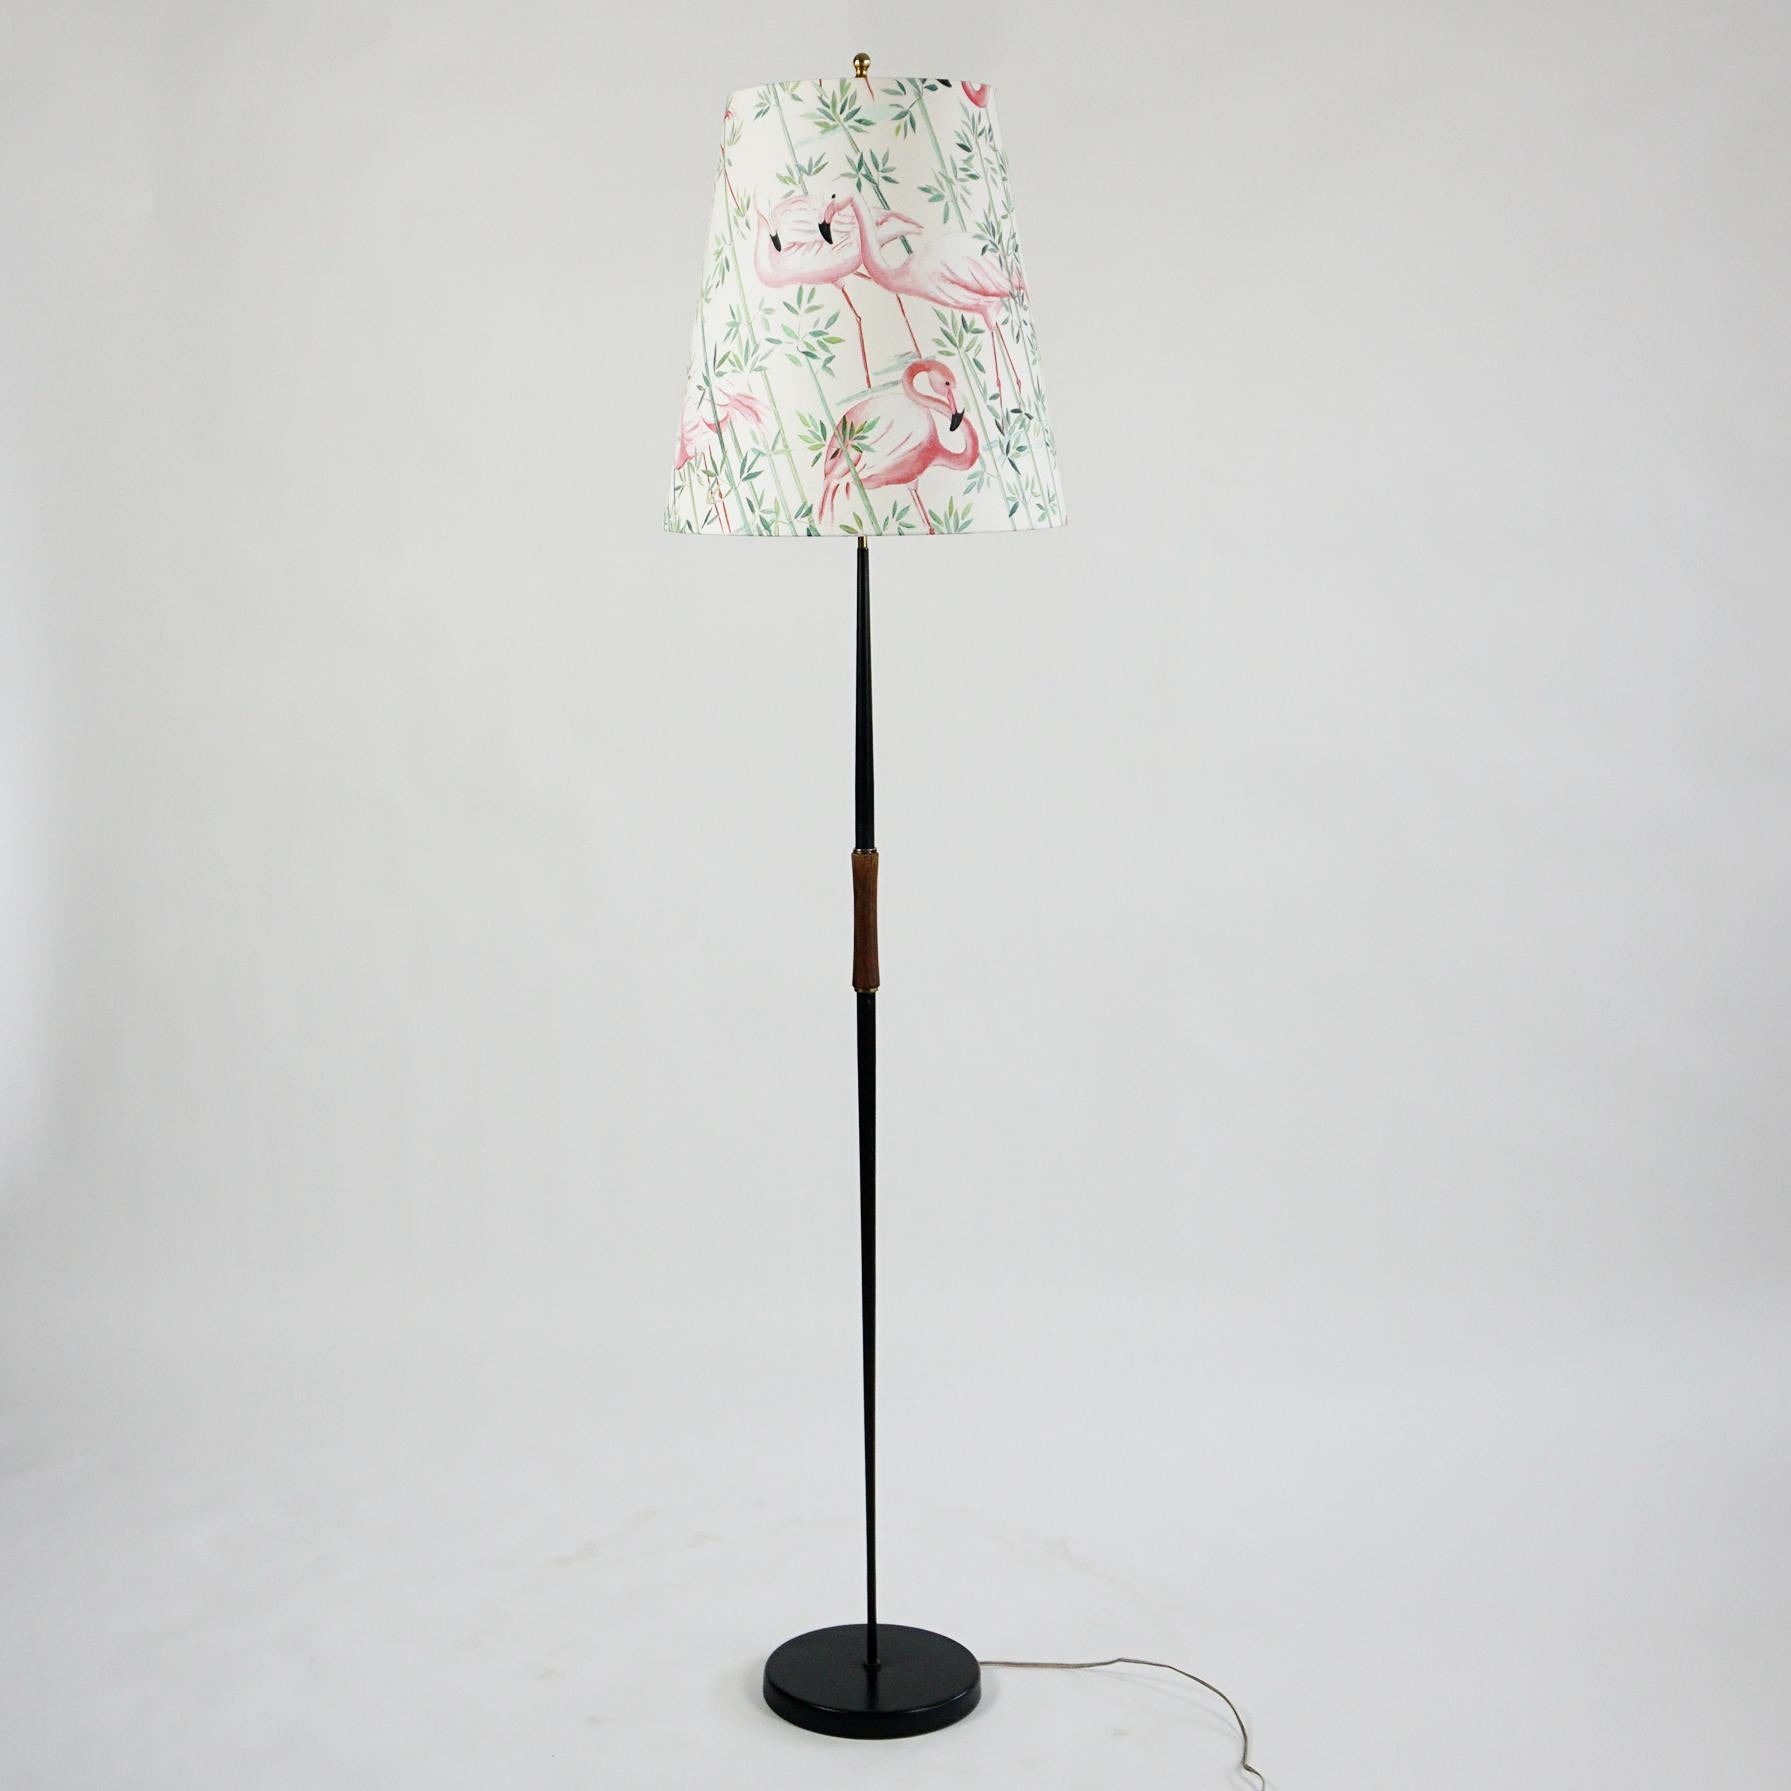 This charming Austrian midcentury floor lamp features a black lacquered iron base and a brass final fitting on the top which holds the shade, which has been renewed and its fabric shows pink Flamingo and green floral decor.
Its style is very close